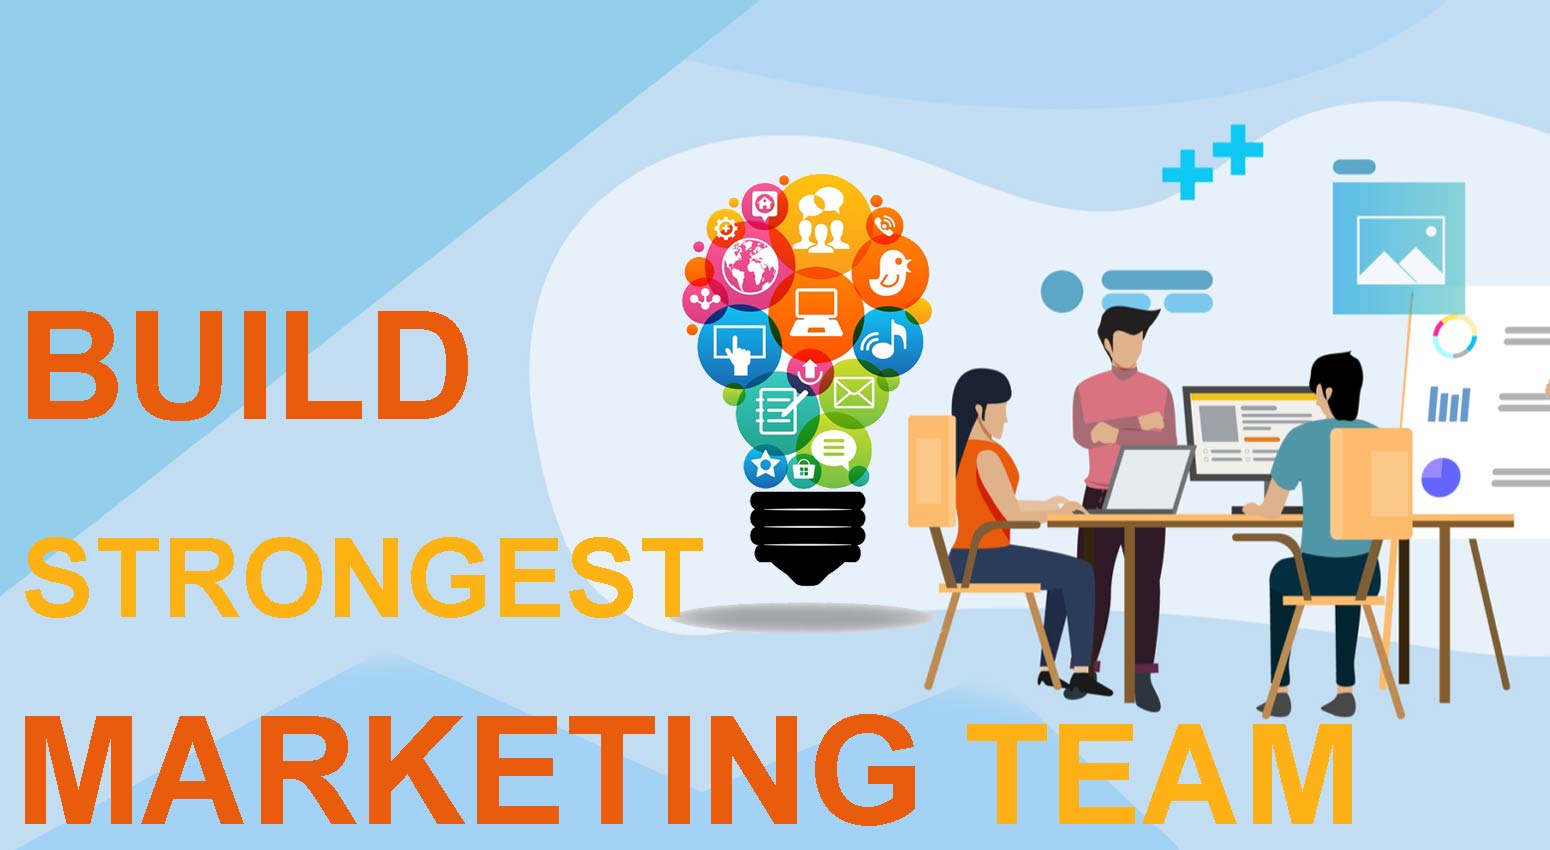 Build the Strongest Marketing Team